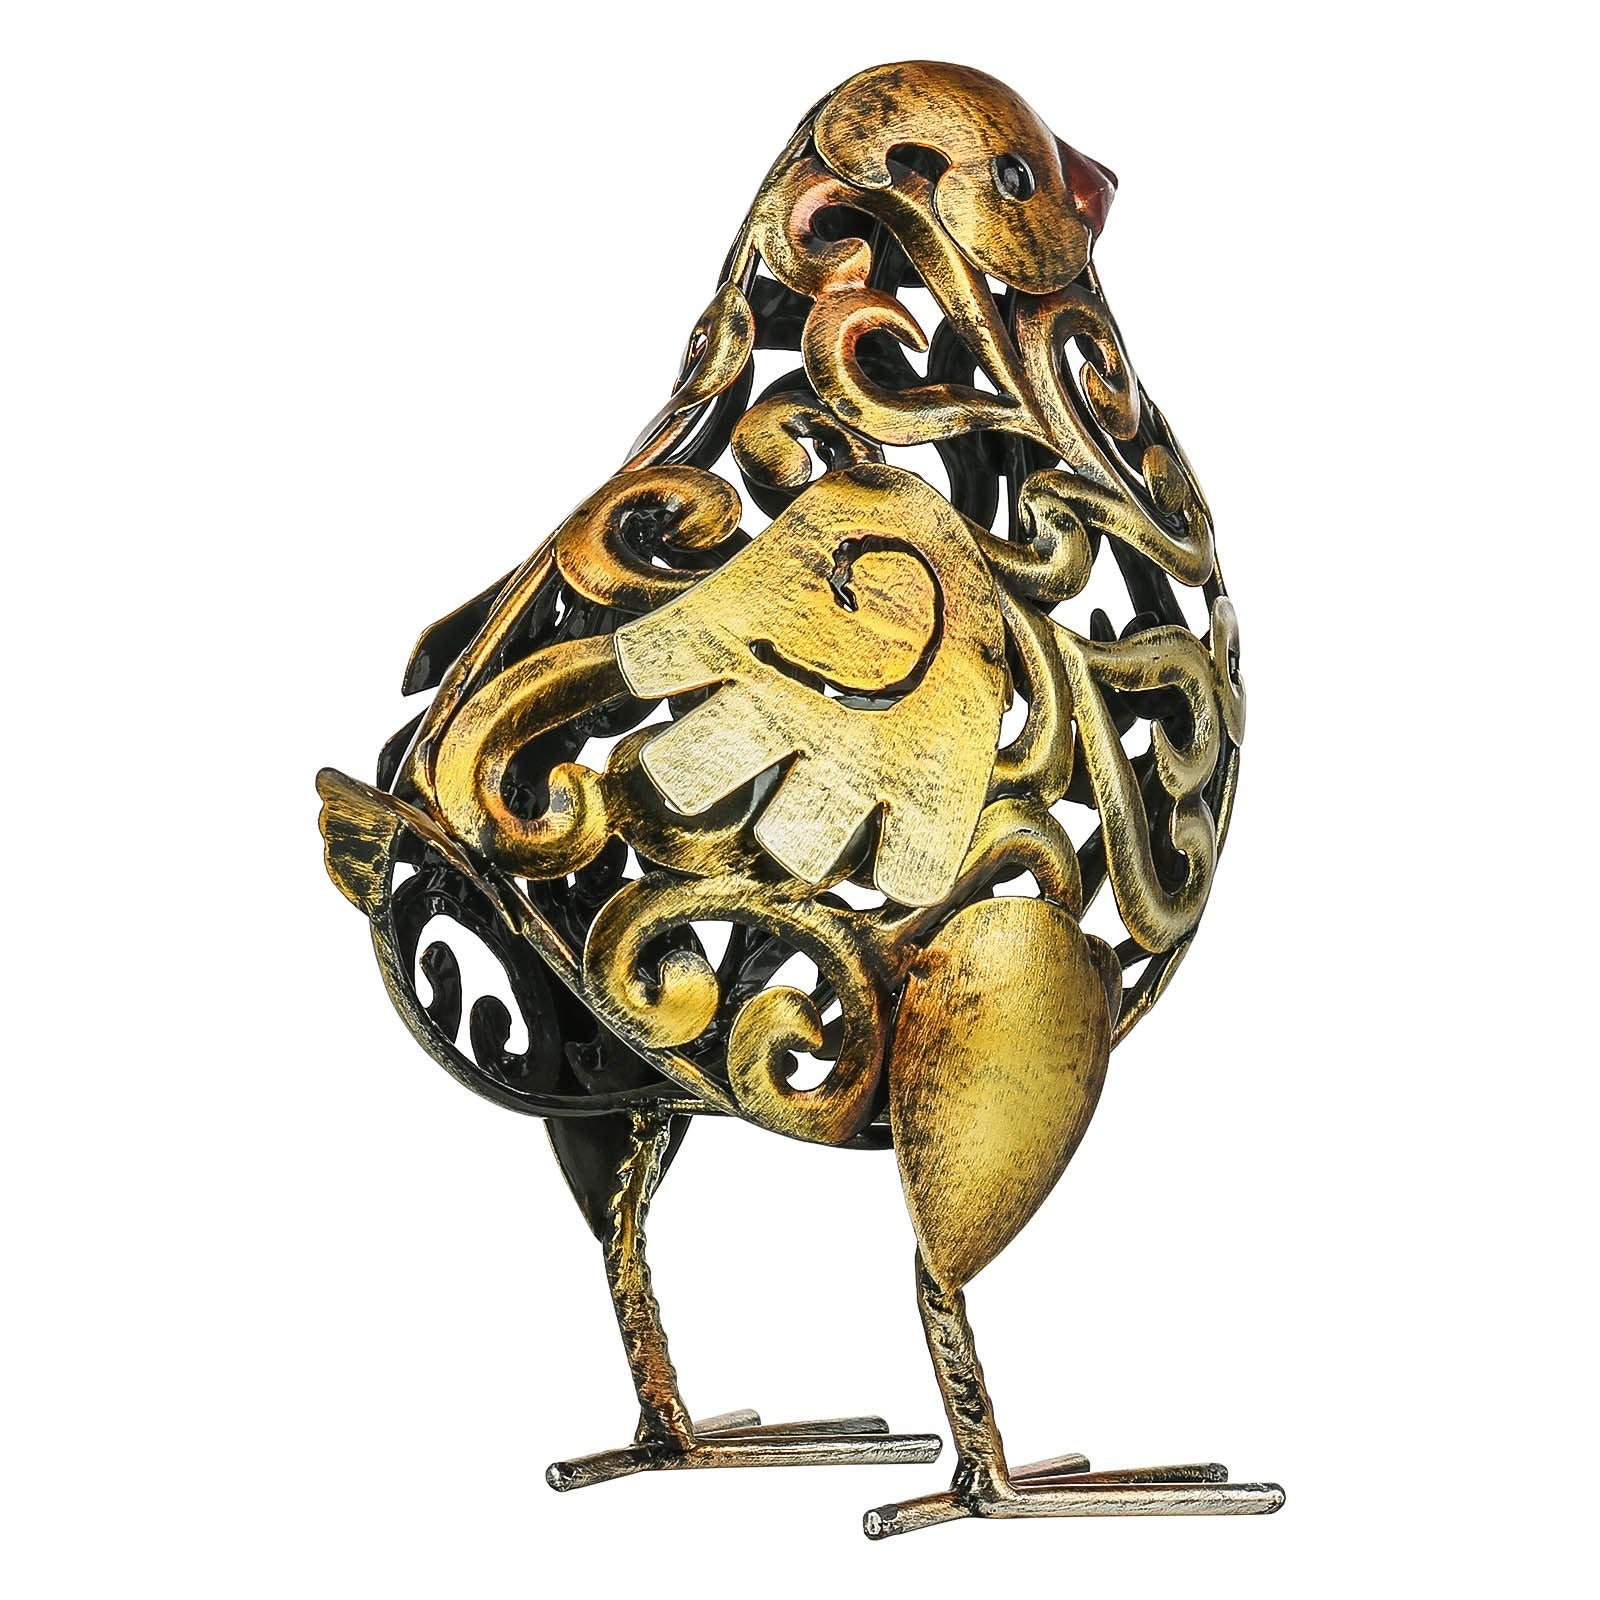 Give your home that rustic or cottage decor style with chicken sculpture!